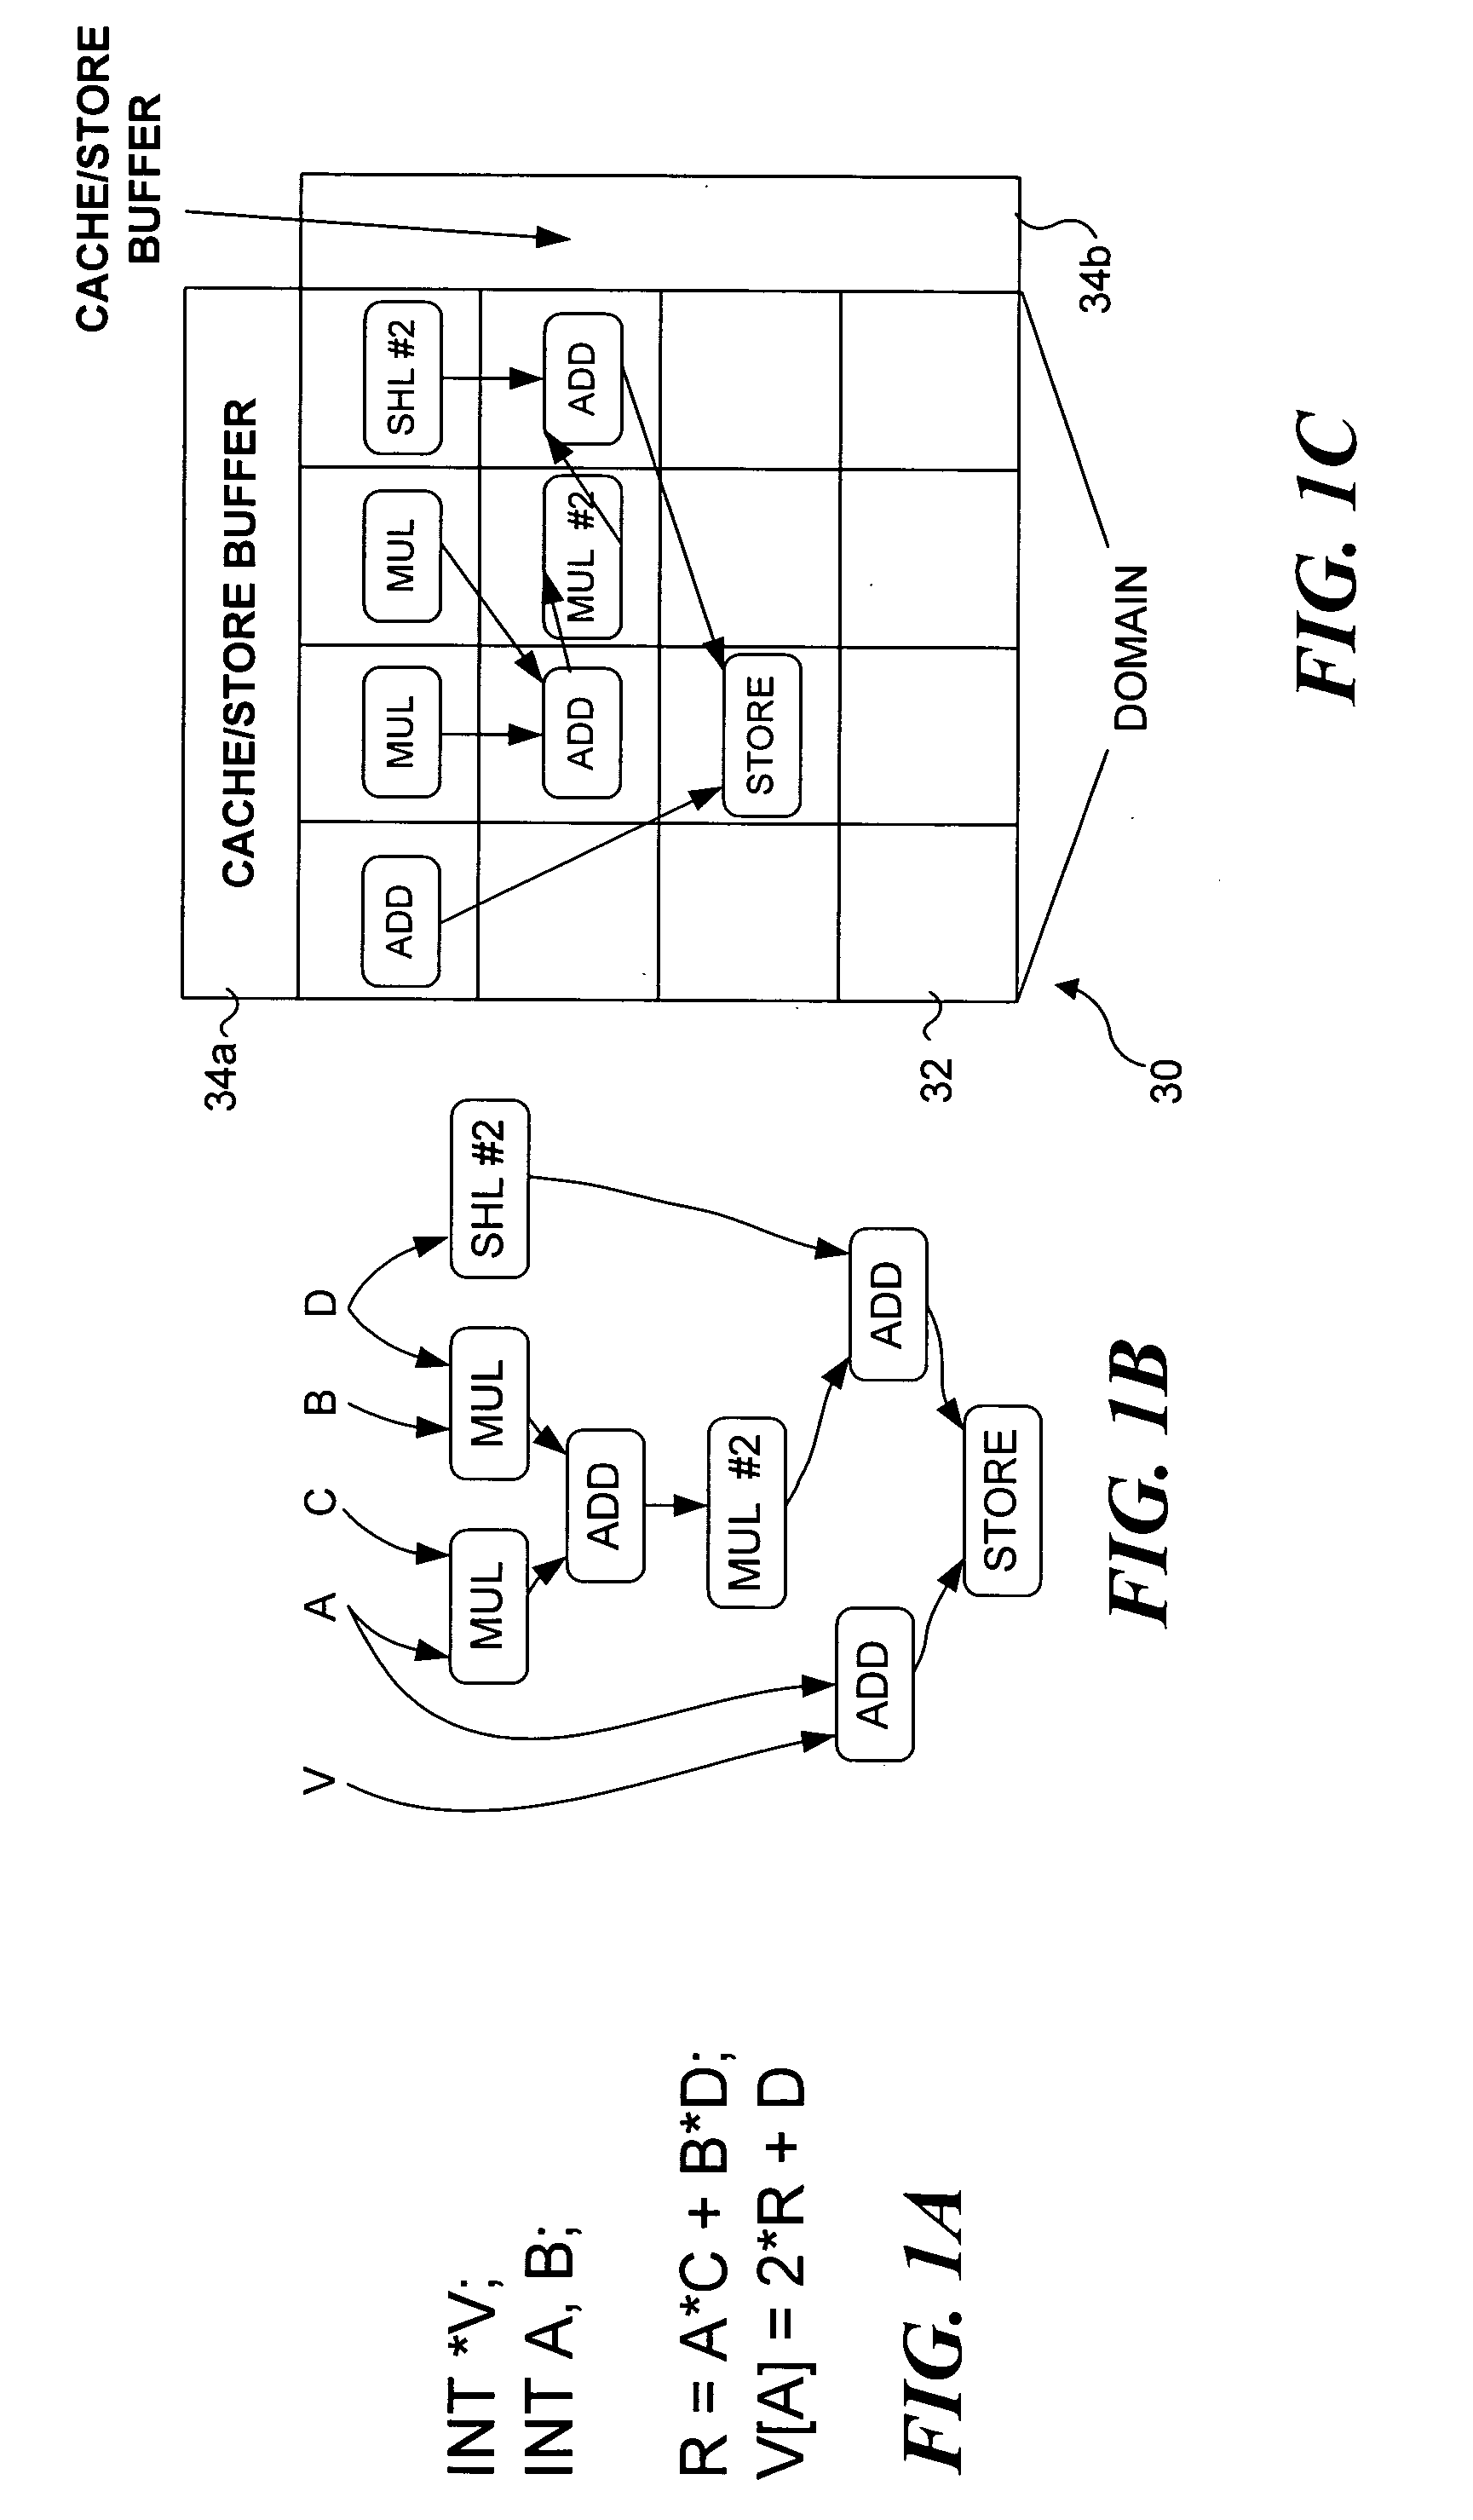 Wavescalar architecture having a wave order memory